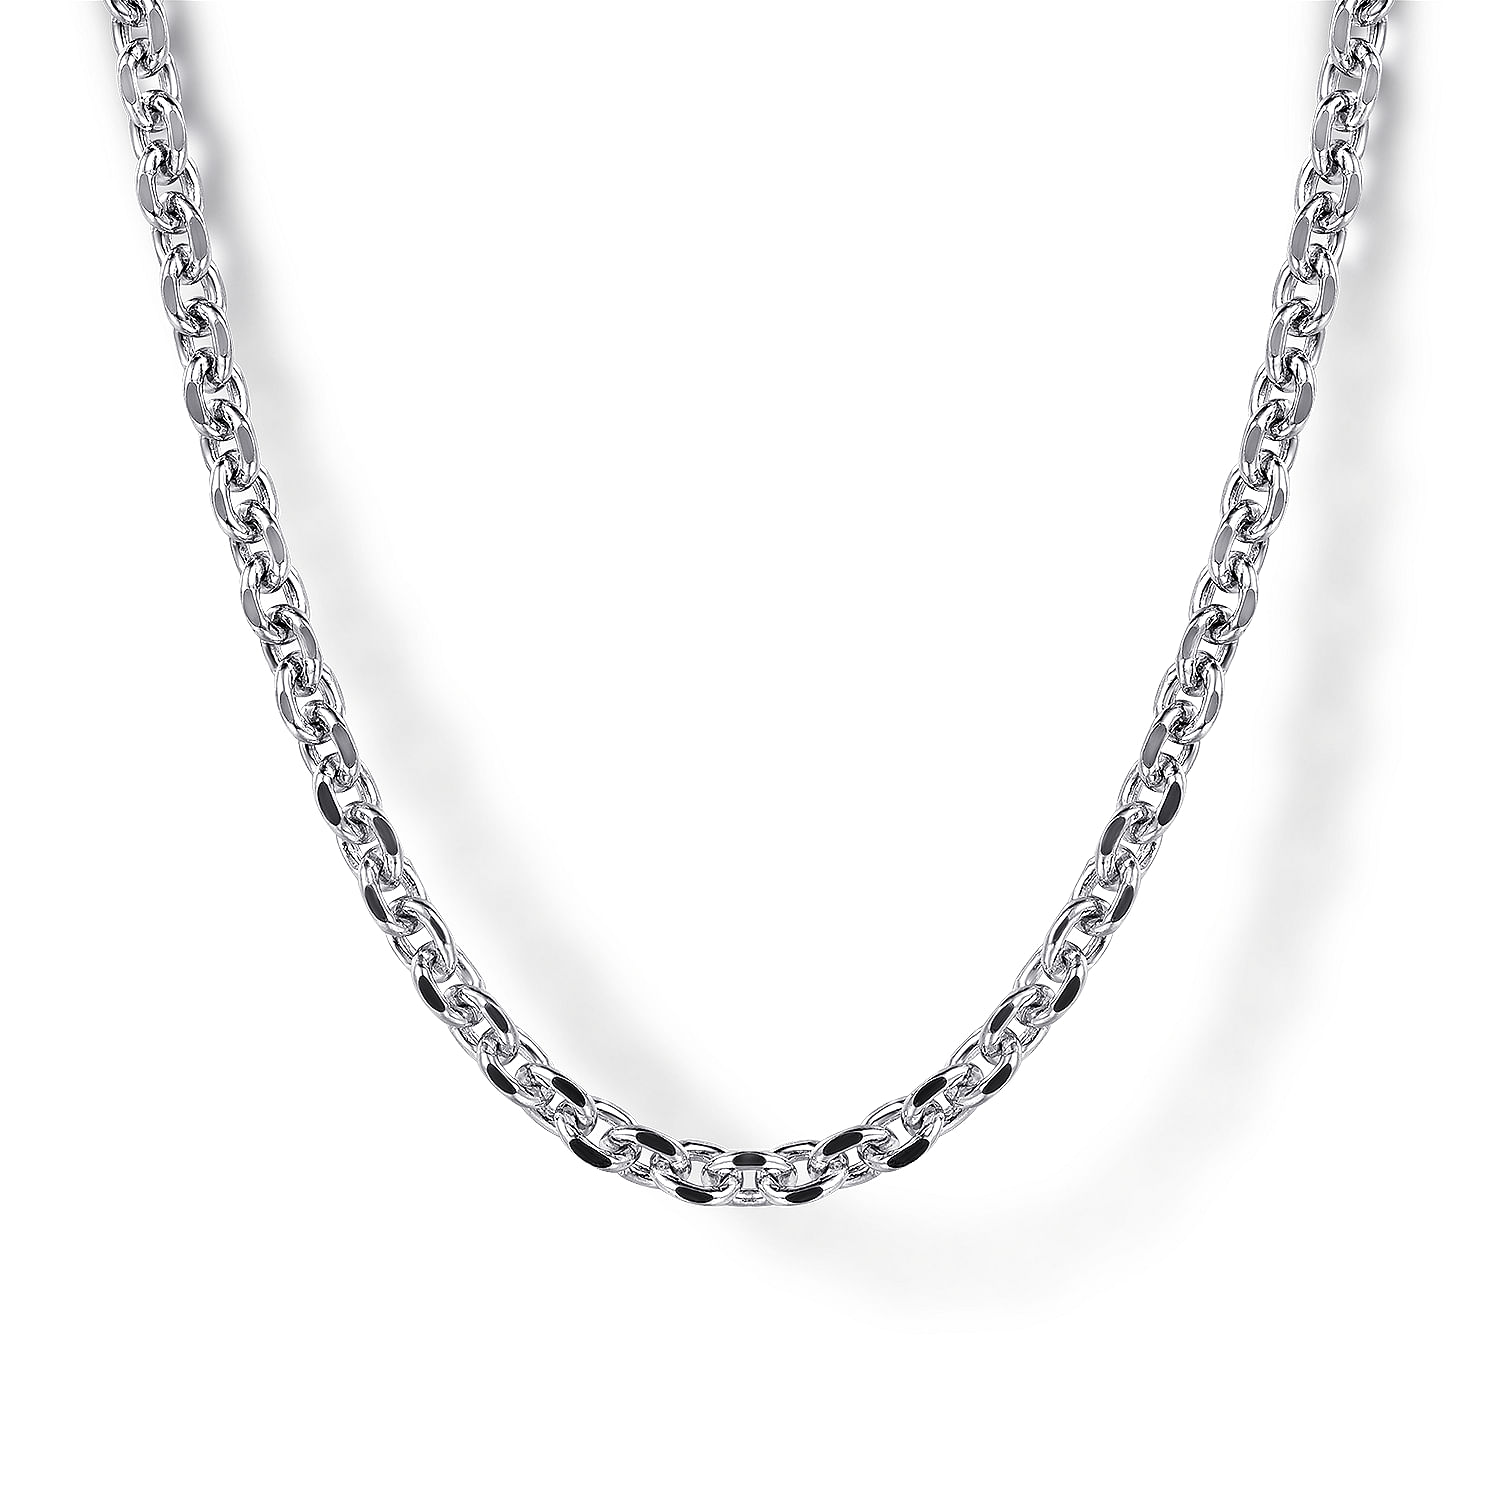 20 Inch 925 Sterling Silver Men's Link Chain Necklace 